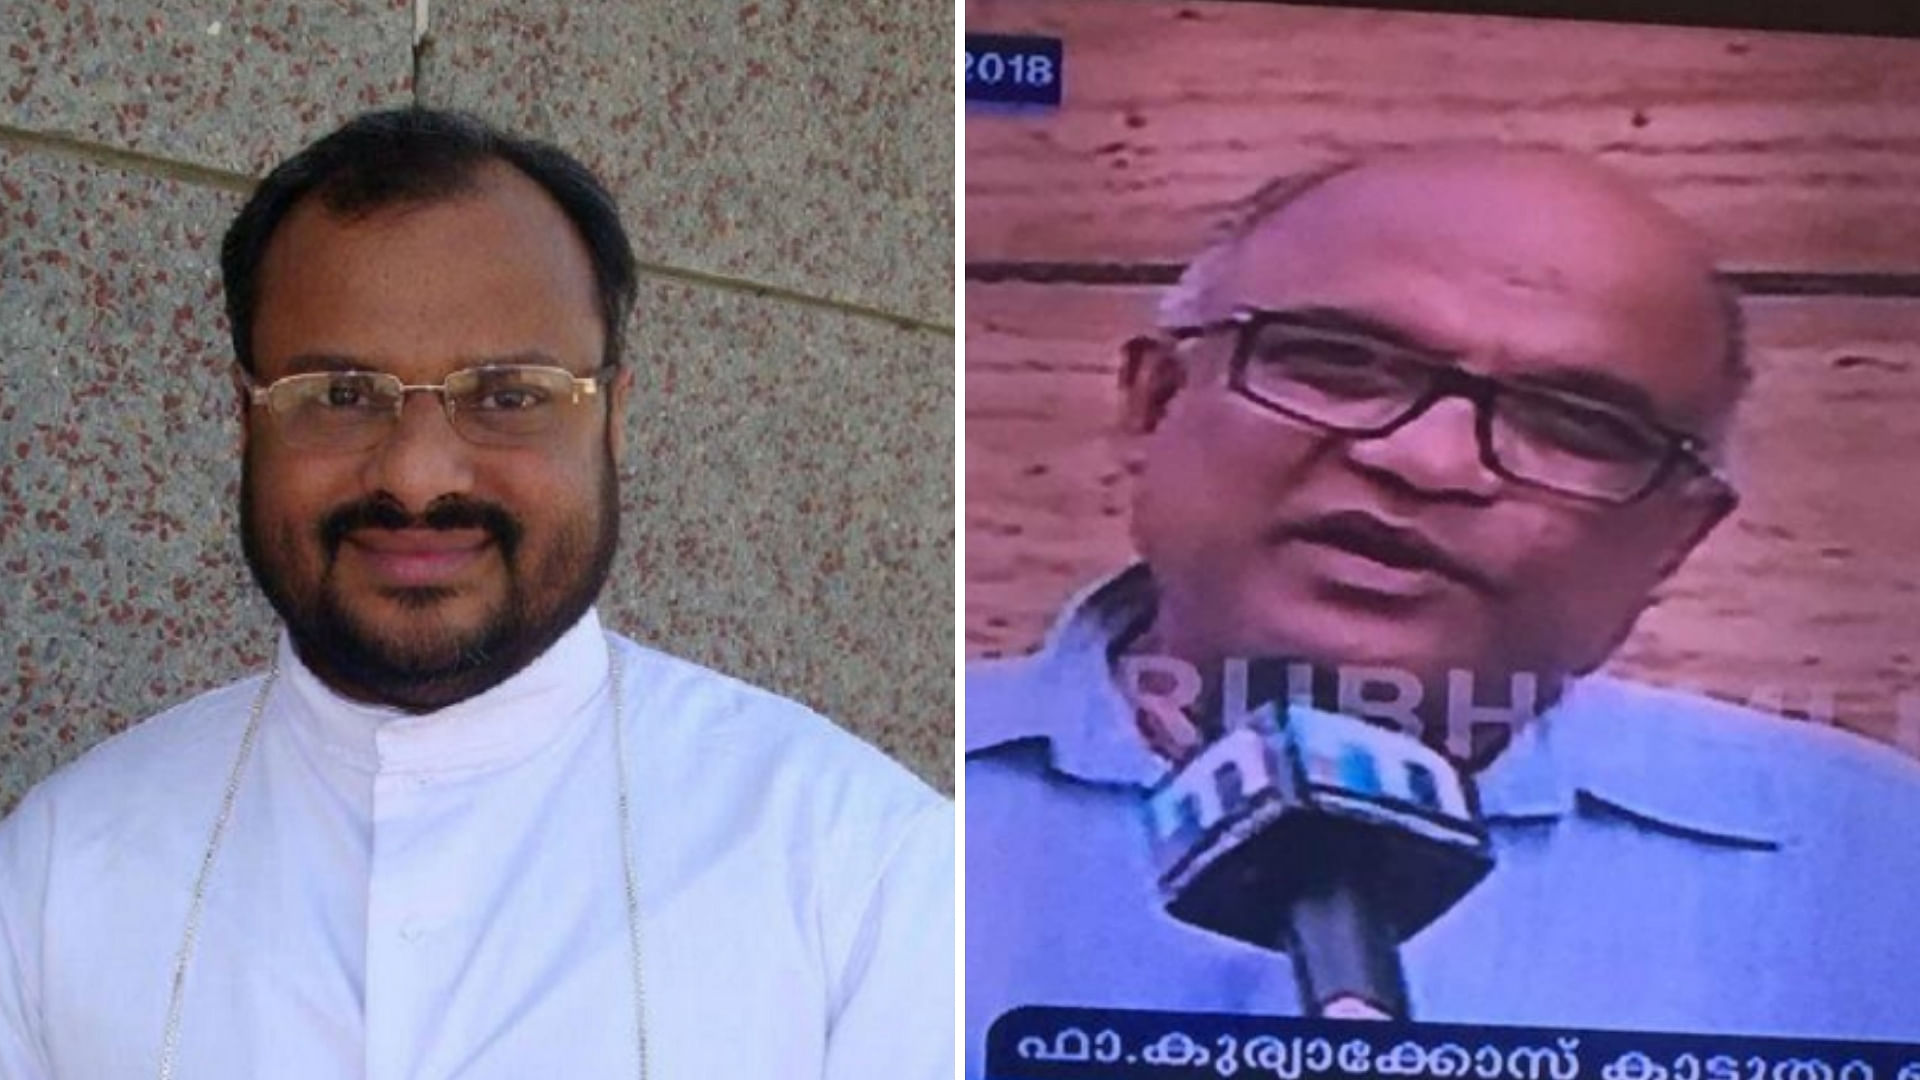 Father Kuriakose Kattuthara (R), one of the prime witnesses who had testified against rape accused Bishop Franco Mulakkal (L), was found dead on Monday, 22 October.